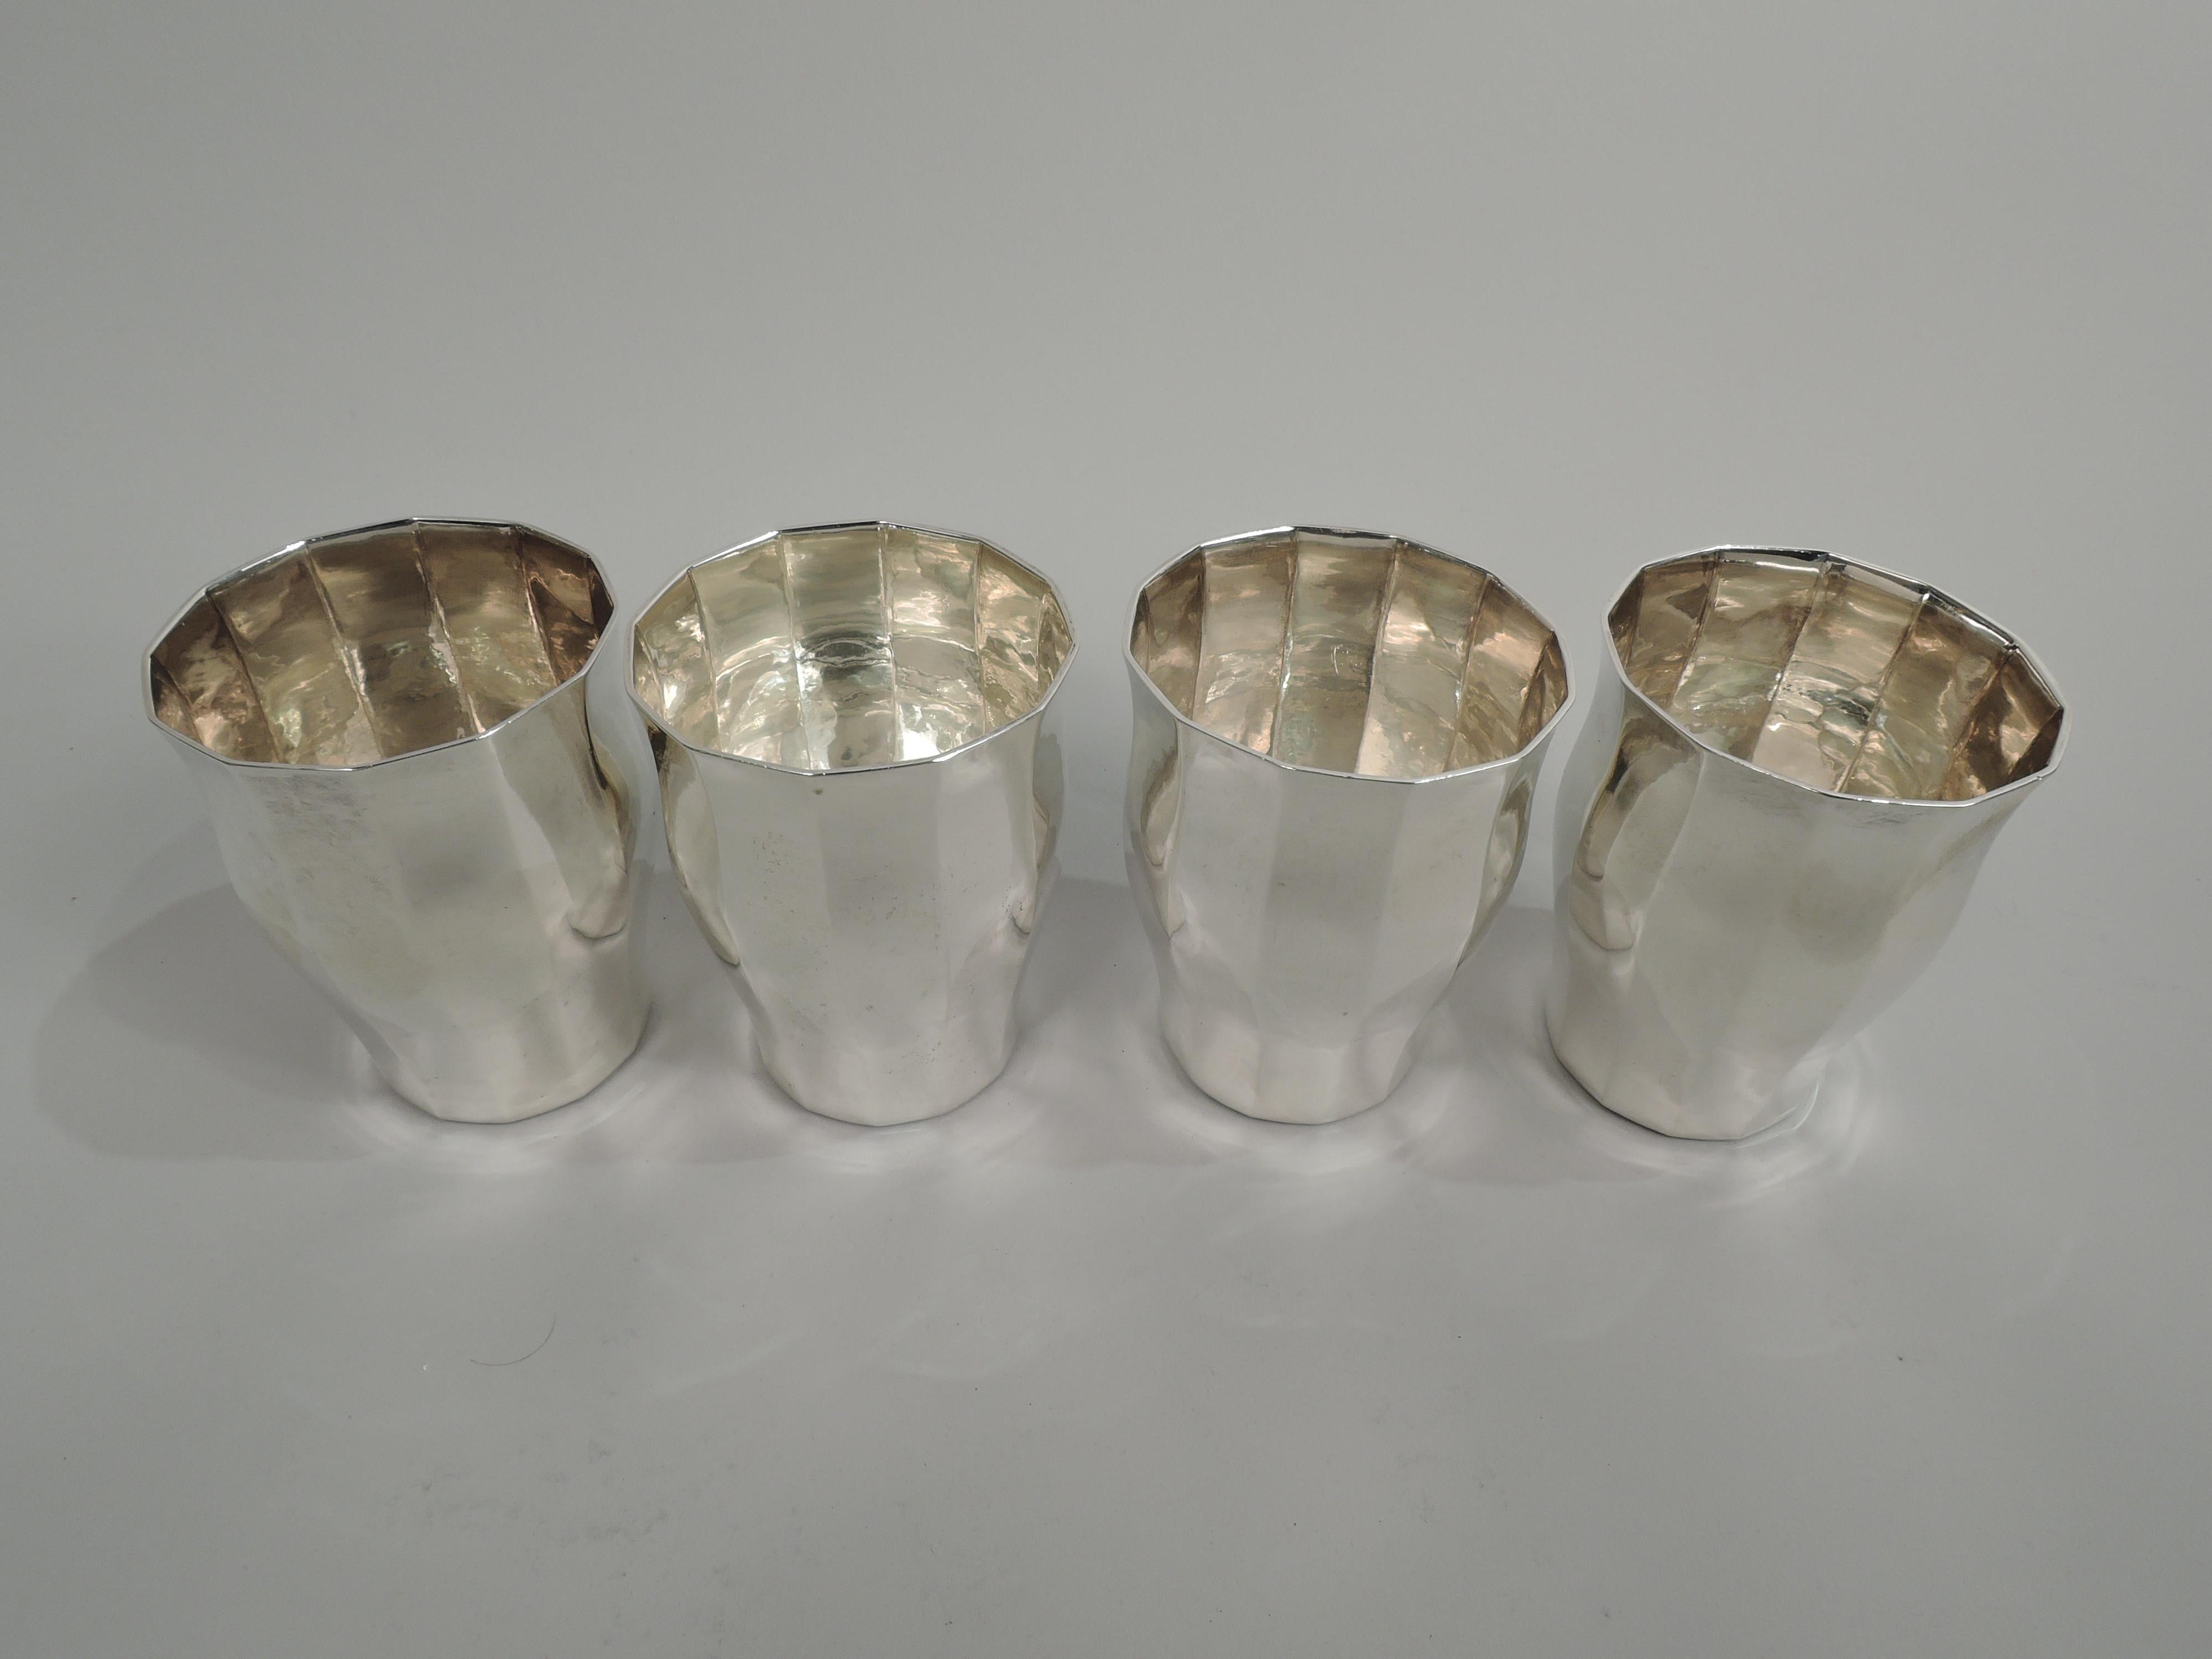 Set of 4 Art Deco Craftsman sterling silver tumblers. Made by Tiffany & Co. in New York, ca 1909. Each: Gentle baluster. Soft and narrow facets. Subtle hand hammering. Fully marked including maker’s stamp, pattern no. 17466 (first produced in 1909),